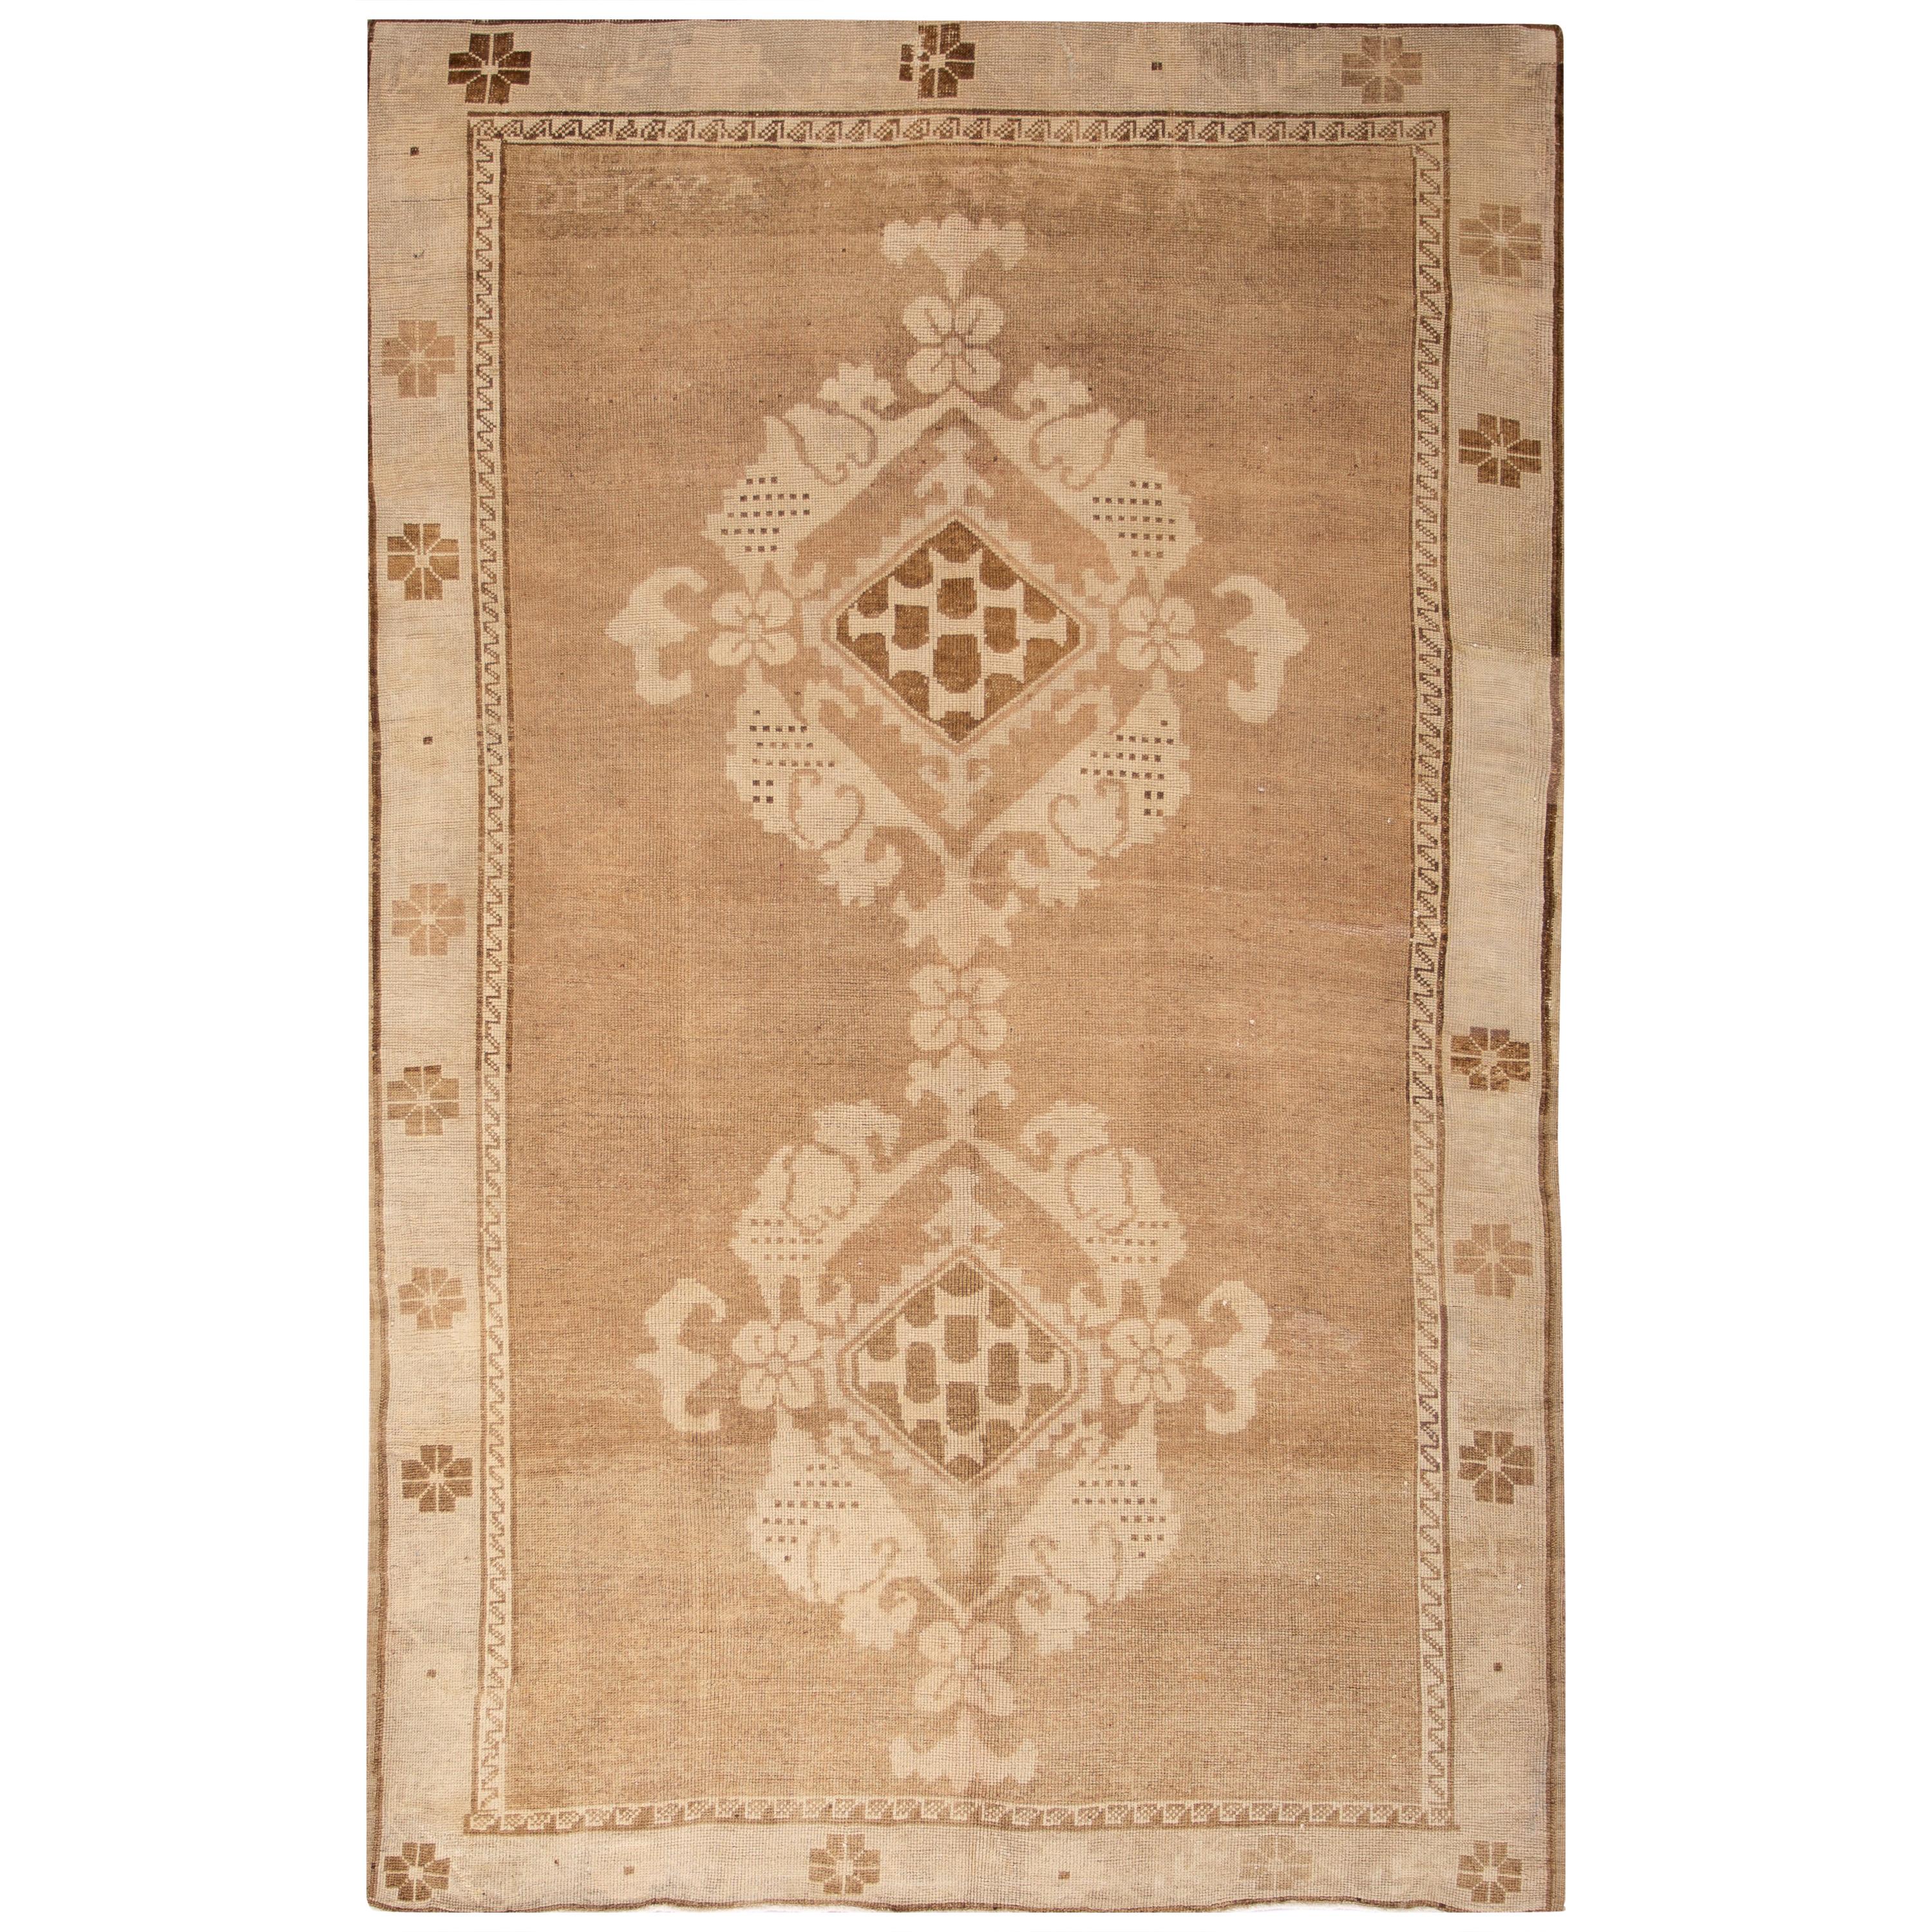 Early 20th Century Brown Antique Khotan Wool Rug with Medallion Design